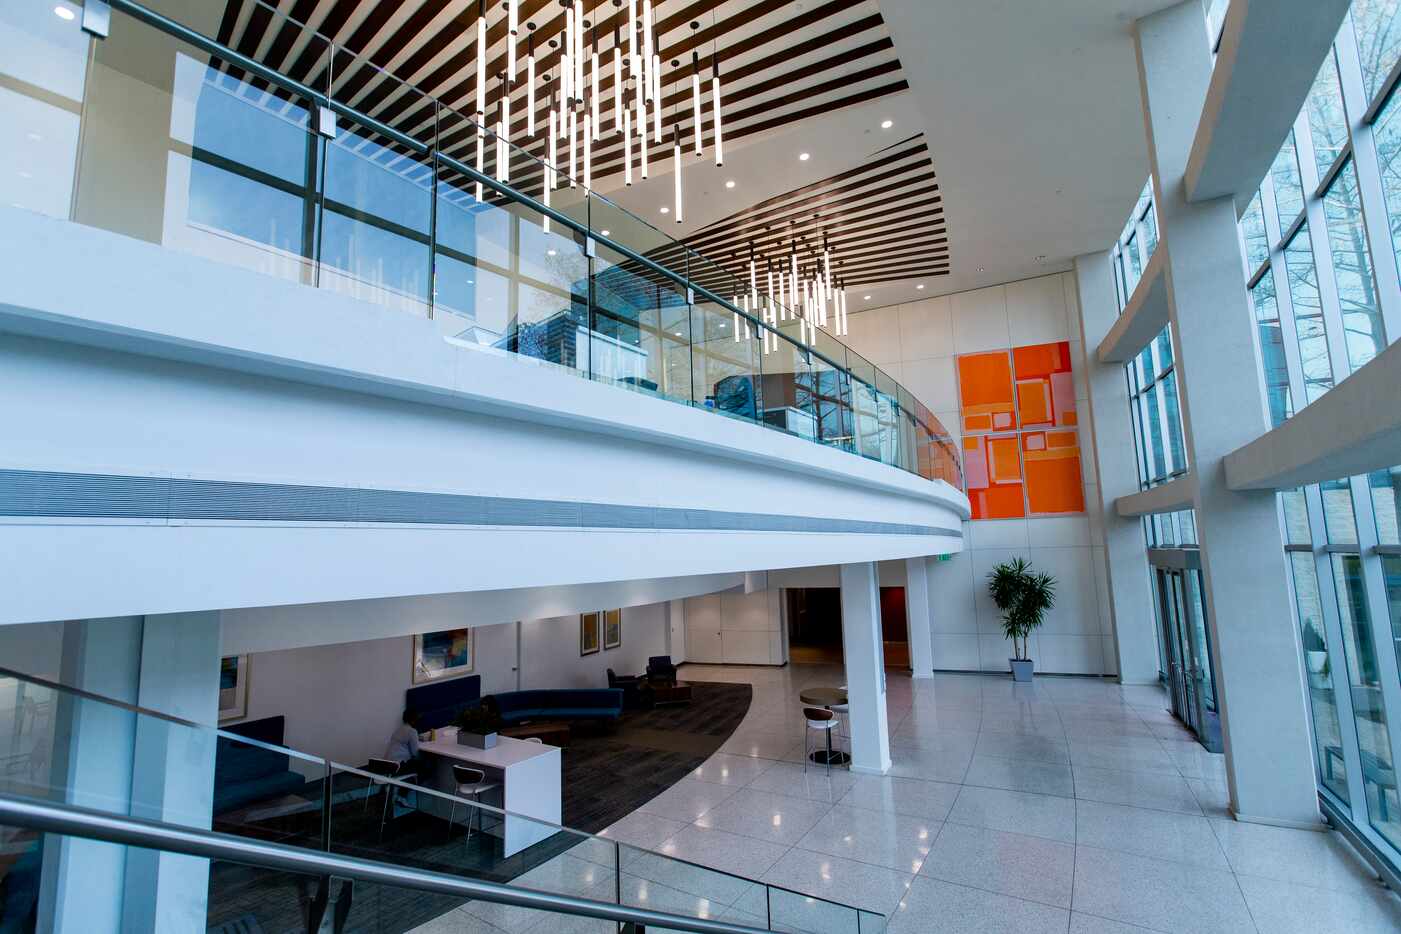 The lobby at the 2400 N. Glenville building in Richardson got a total makeover.